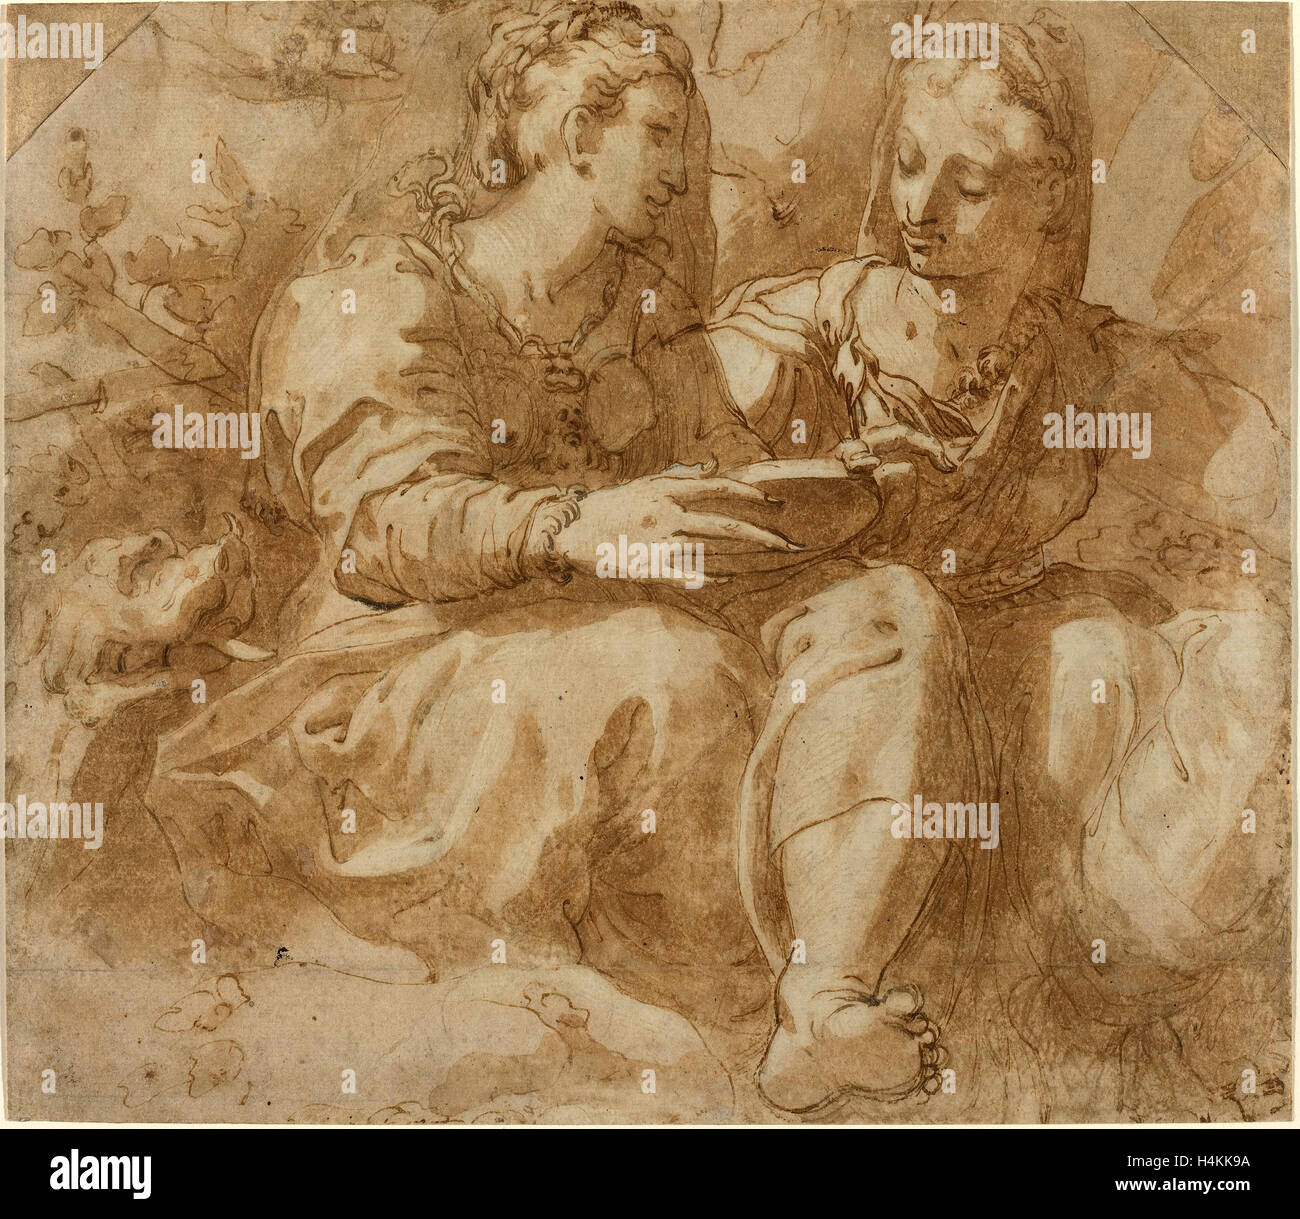 Pellegrino Tibaldi (Italian, 1527 - 1596), Two Seated Women, pen and brown ink with brown wash on laid paper Stock Photo